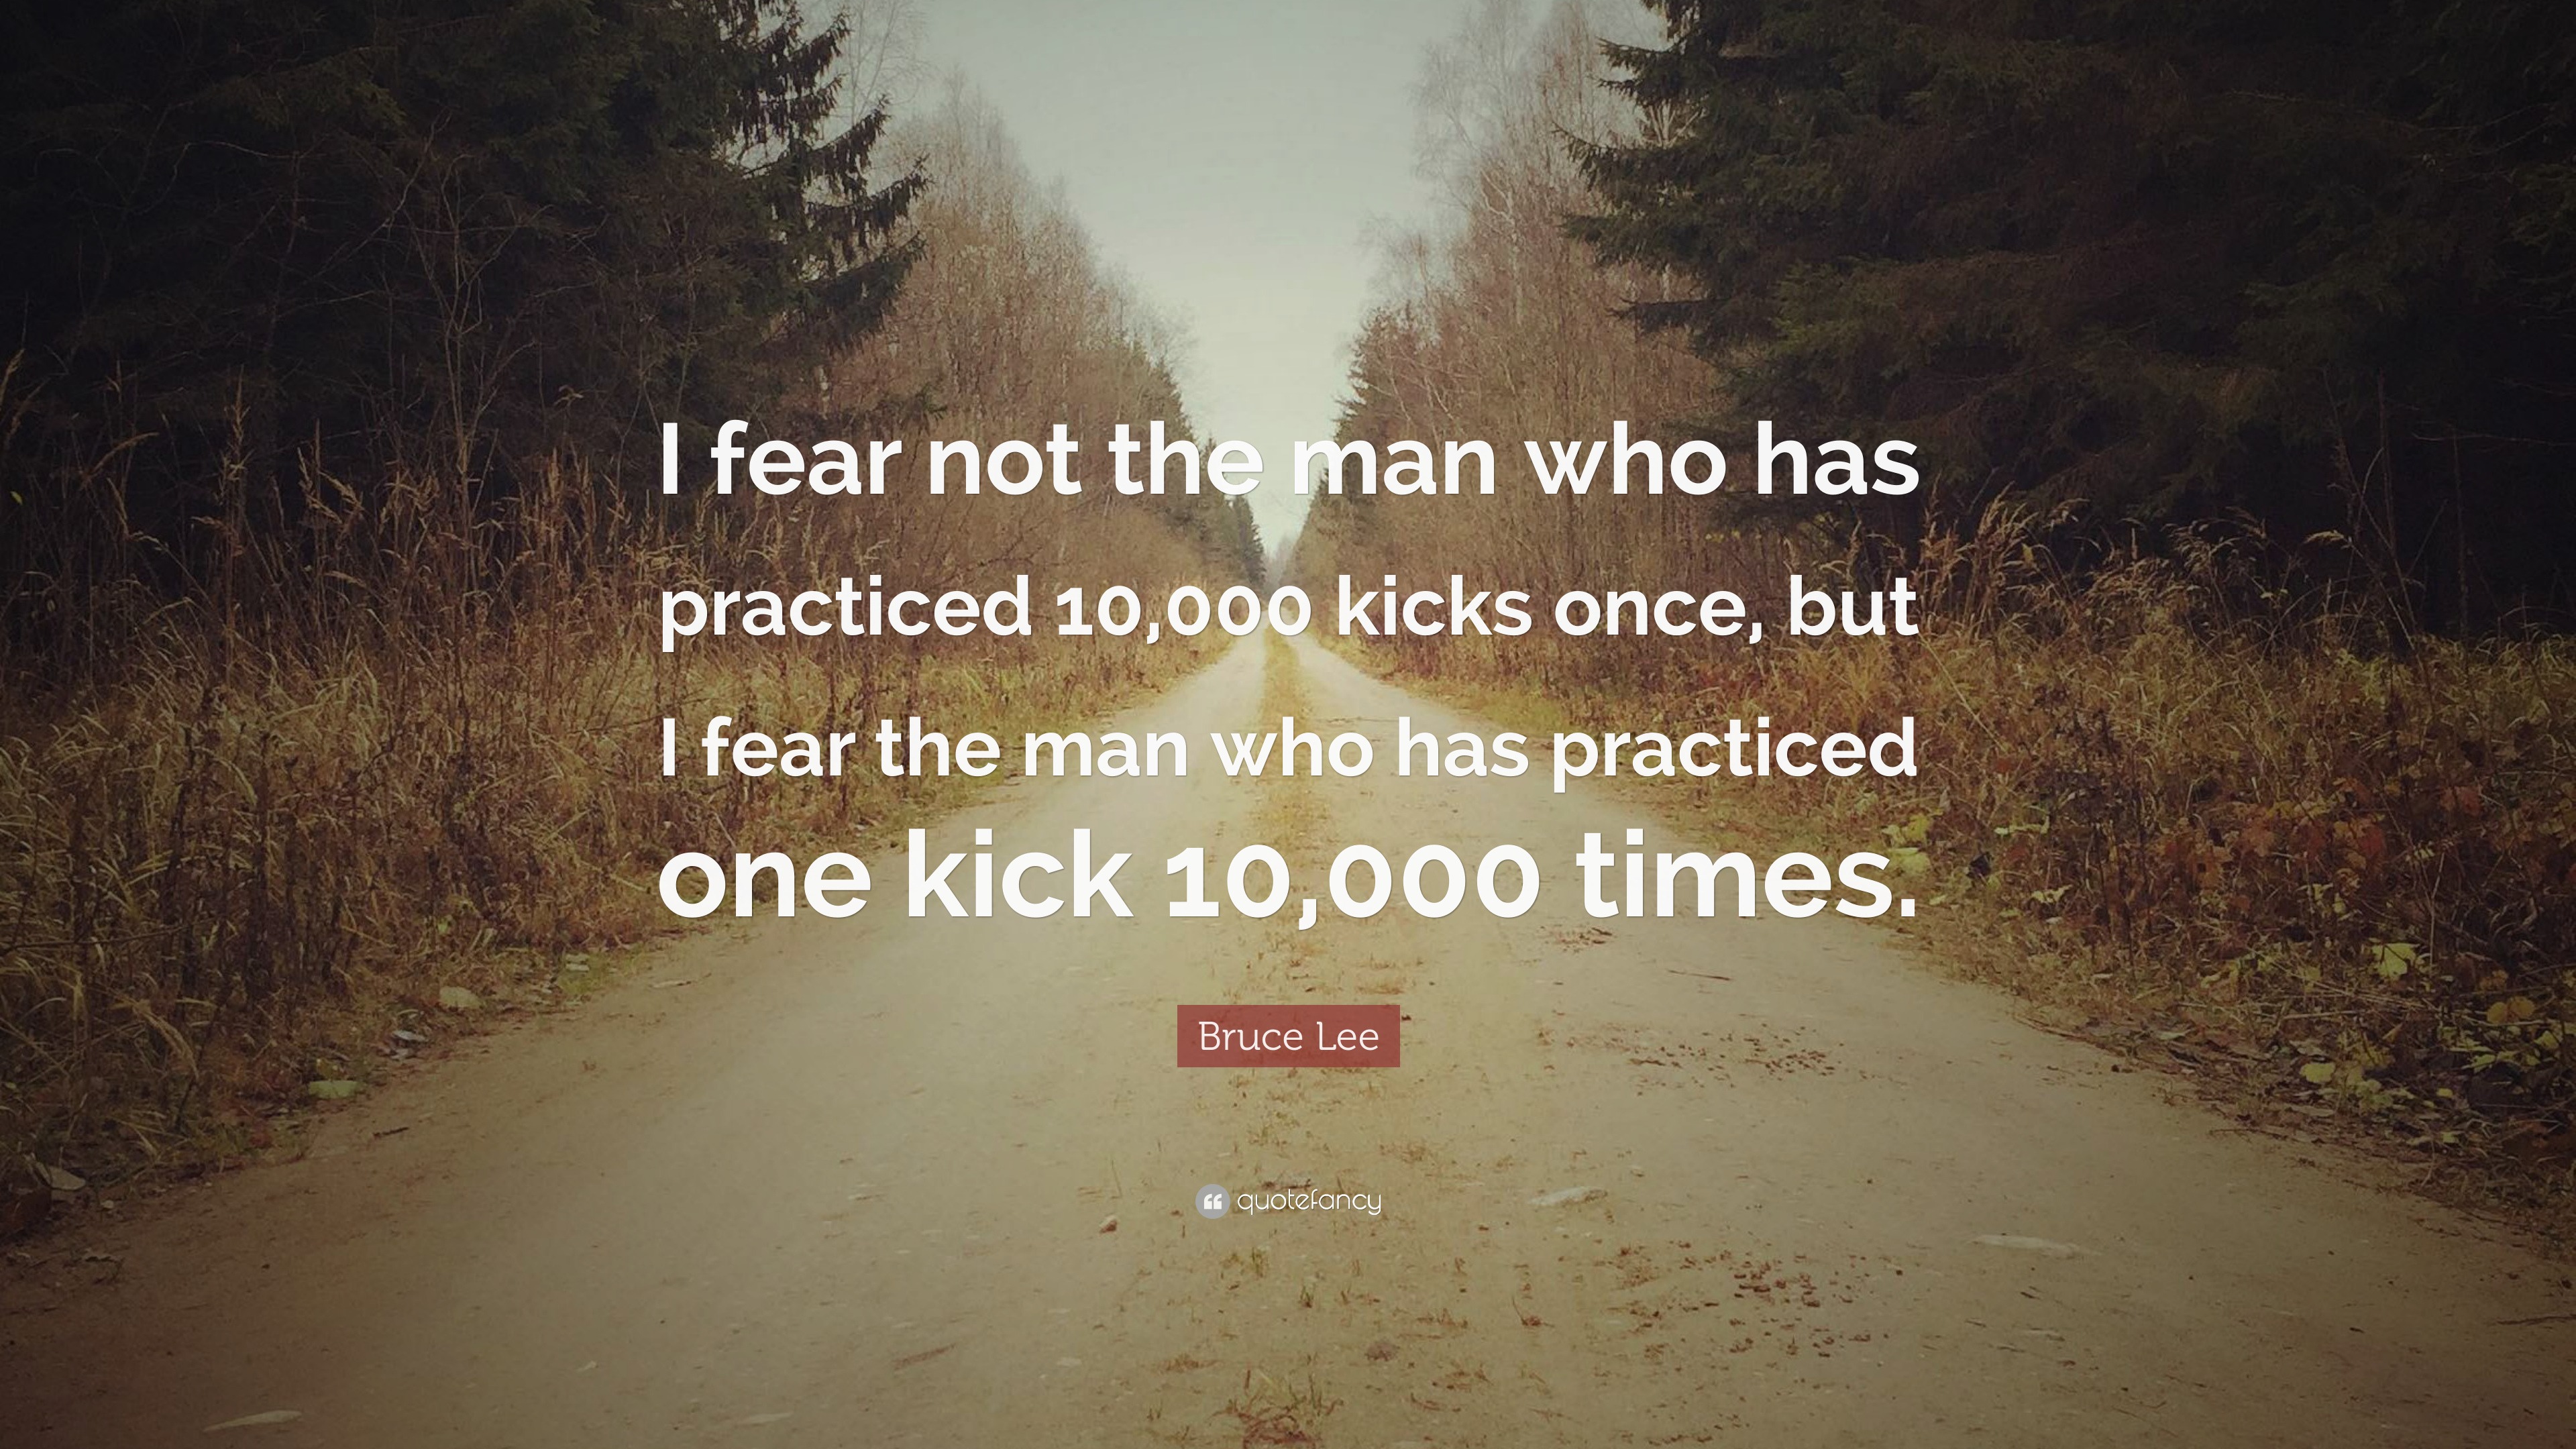 Bruce Lee Quote: “I fear not the man who has practiced 10,000 kicks